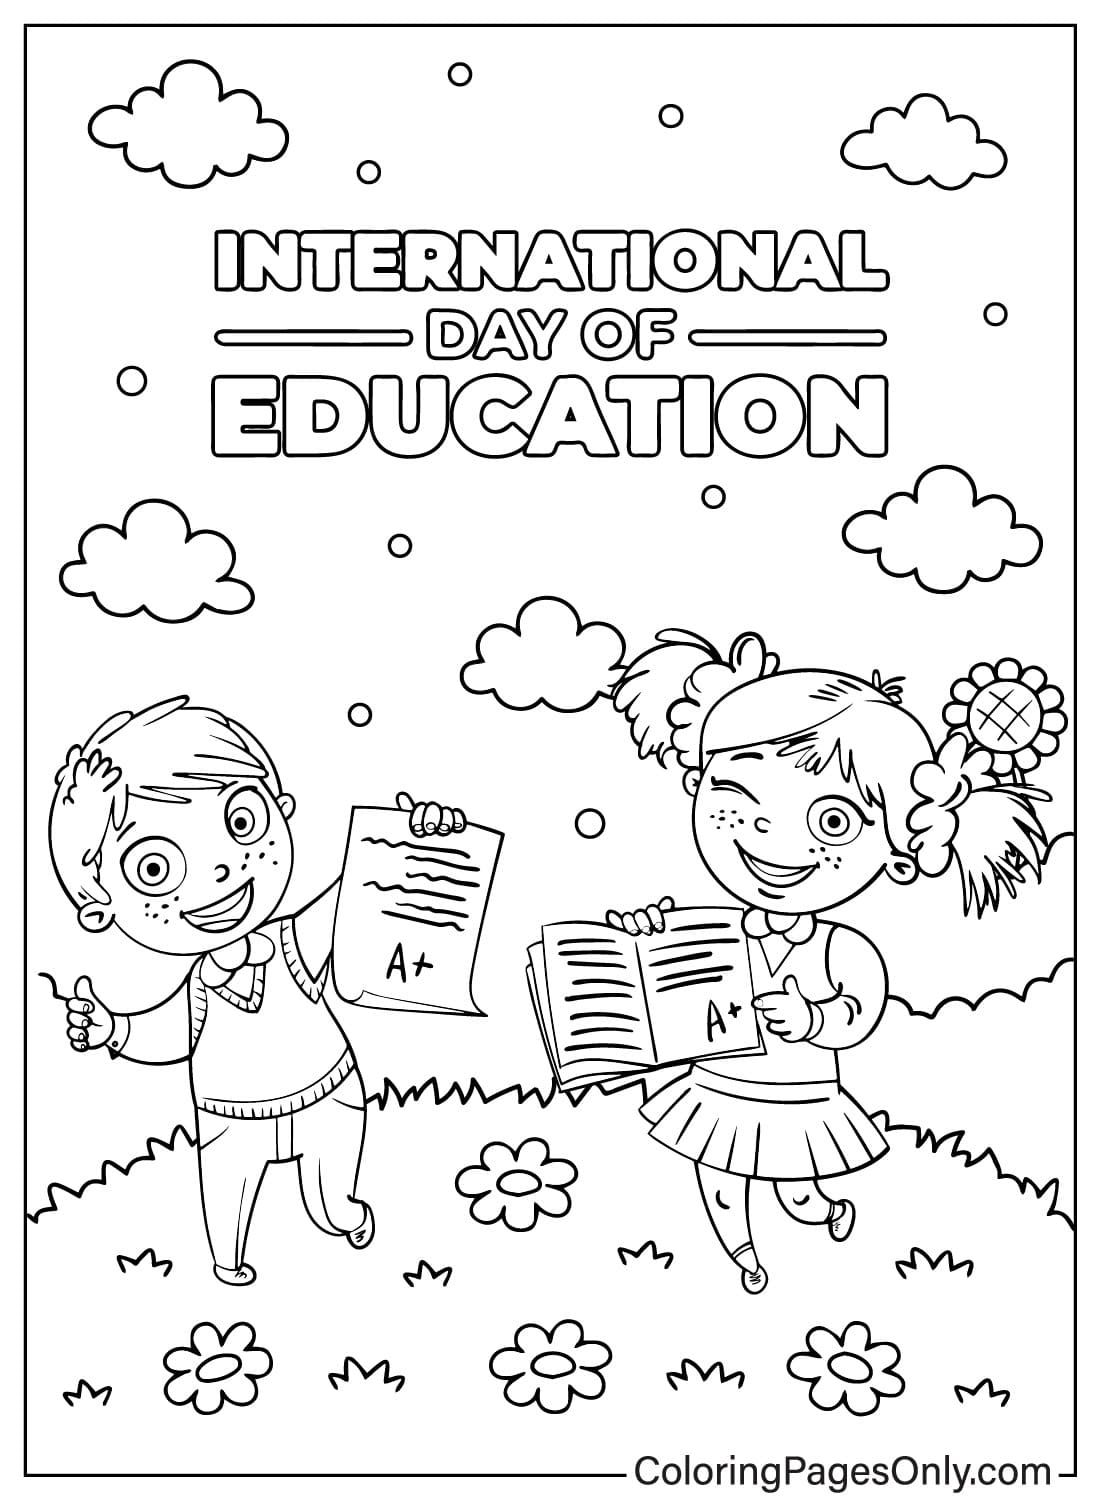 International Day of Education Coloring Pages to Download from International Day of Education